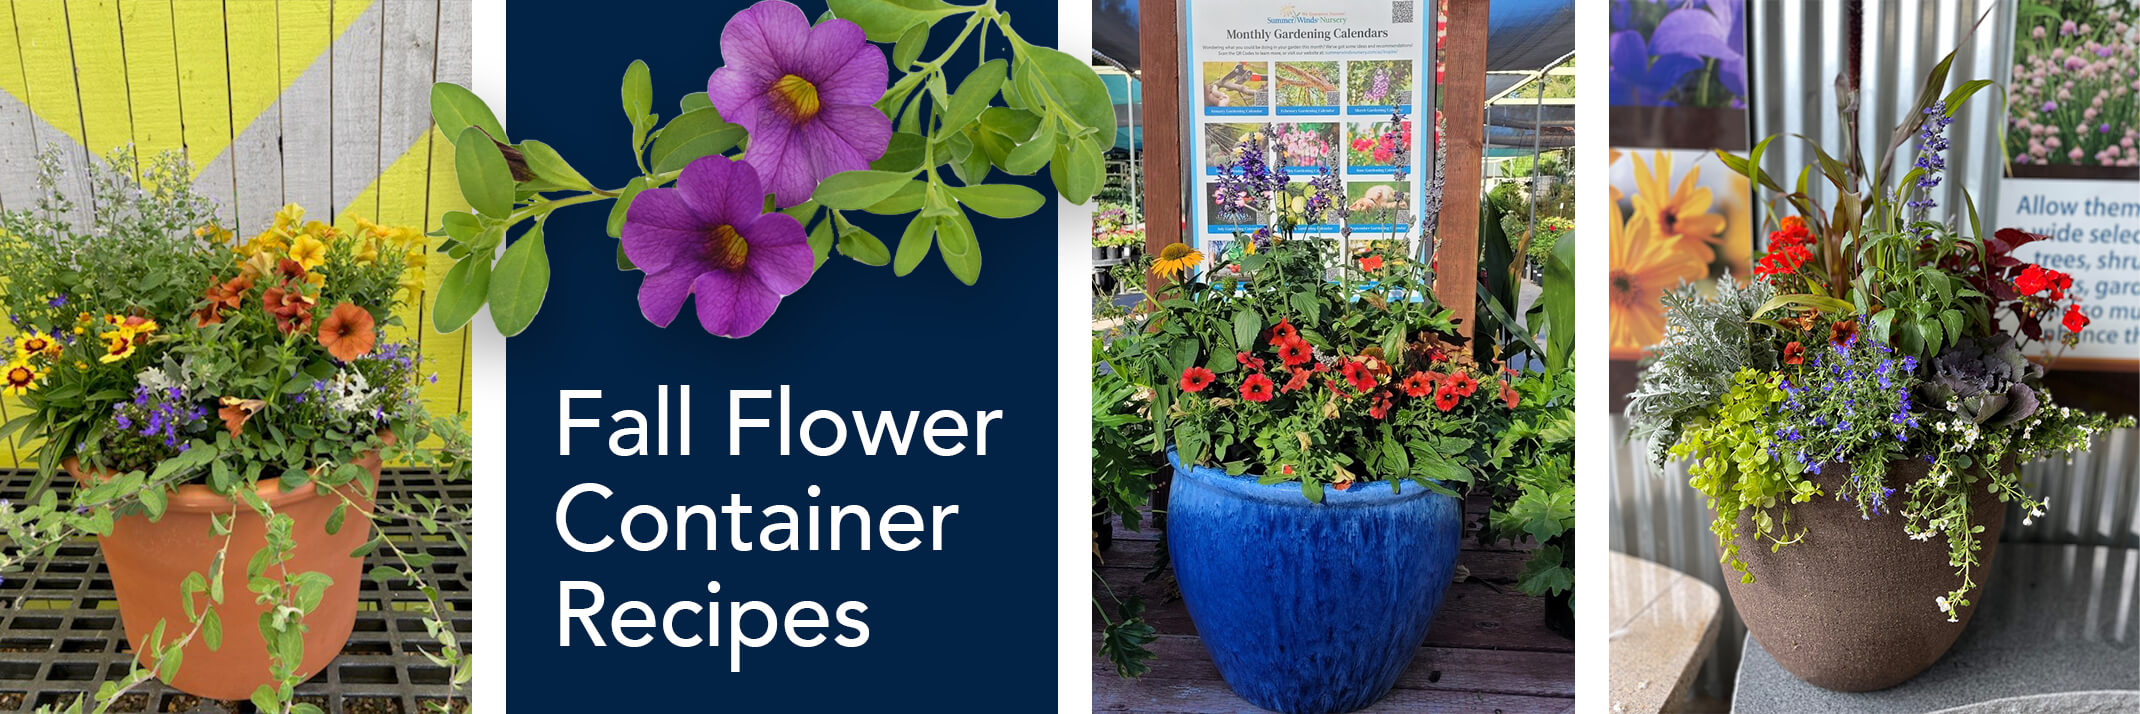 3 different fall flower container displays - one from each SummerWinds Nursery AZ store.